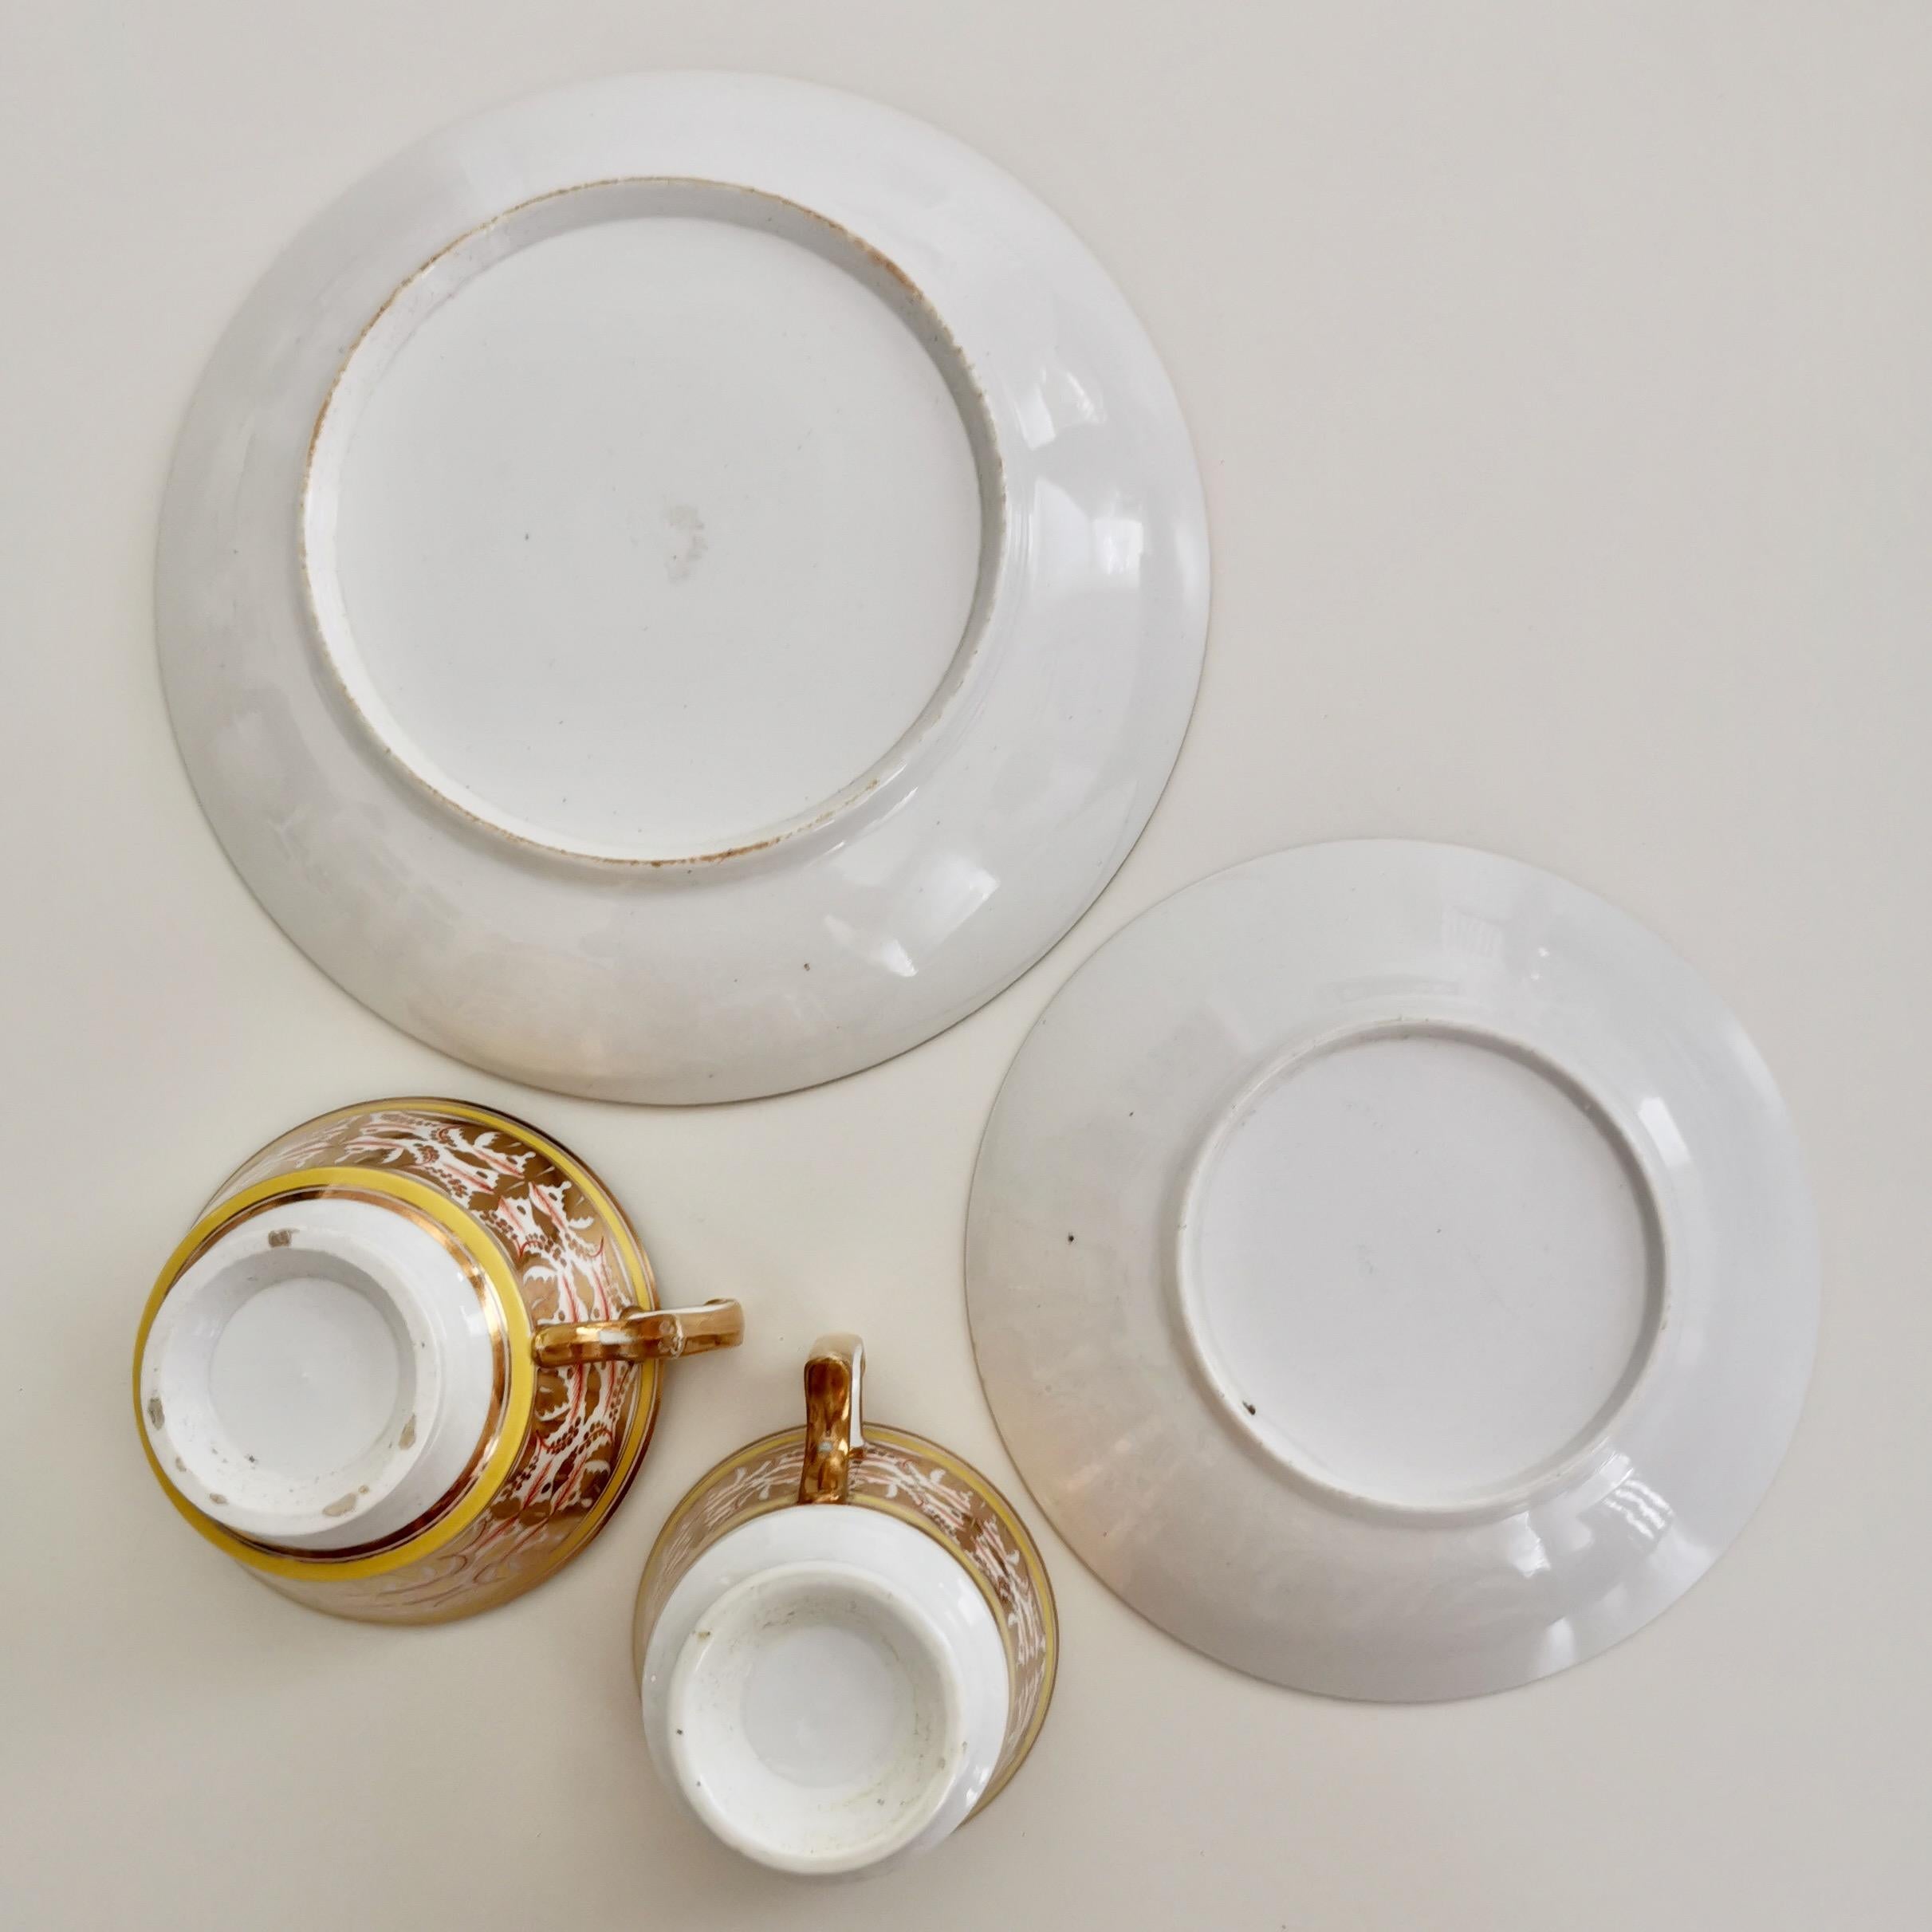 Spode Porcelain Teacup Set, Gilt, Yellow and Red Regency Pattern, circa 1815 13